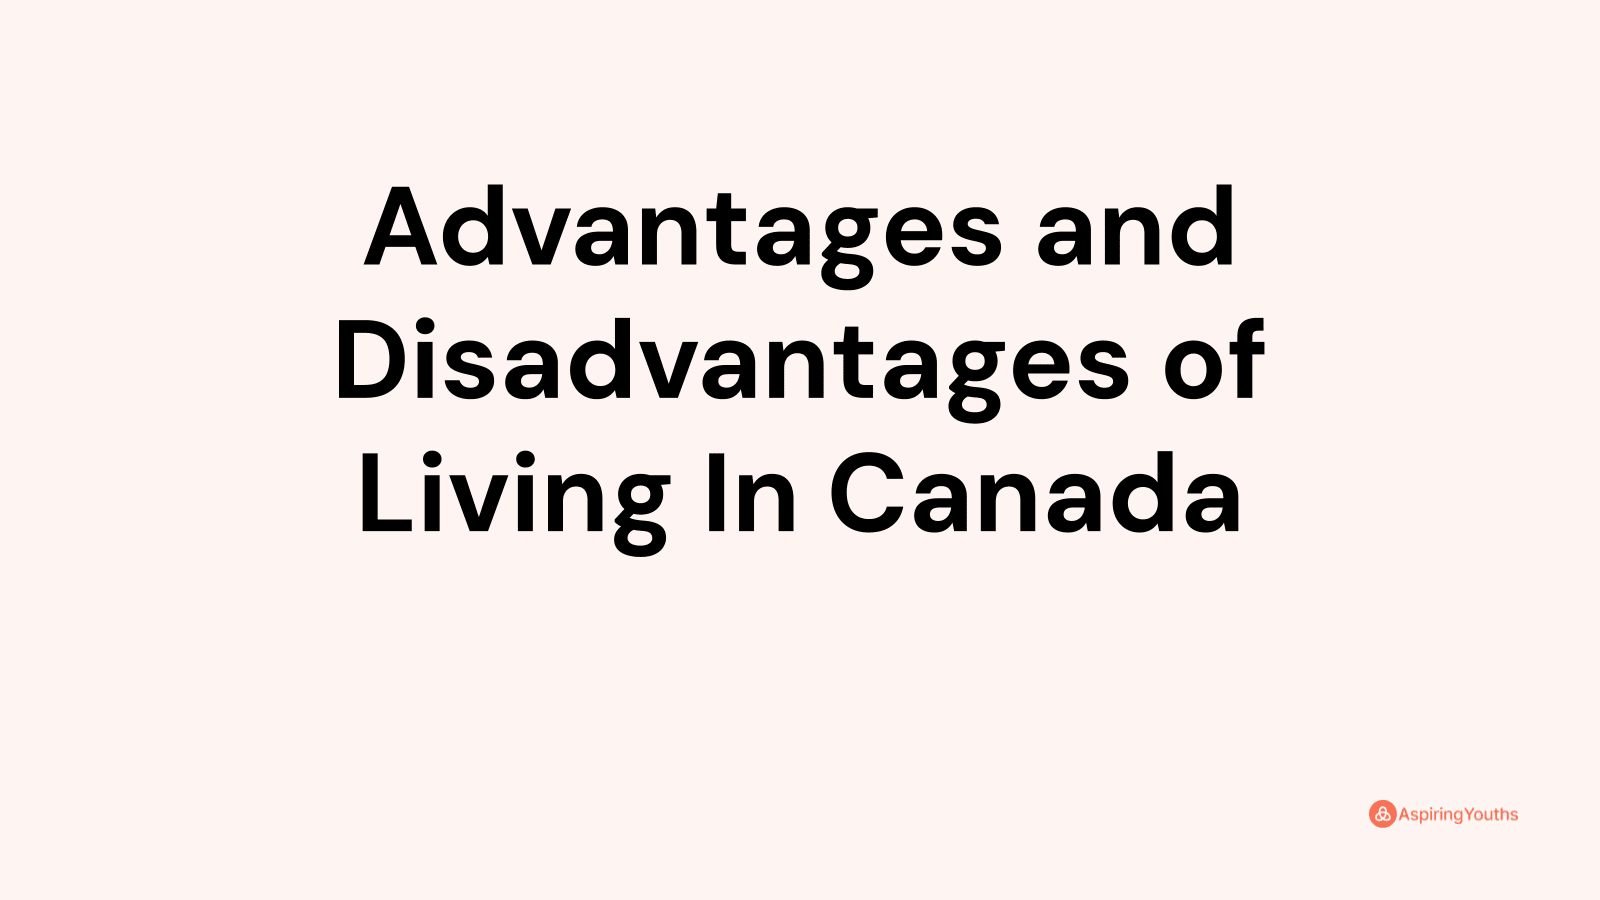 Advantages and disadvantages of Living In Canada